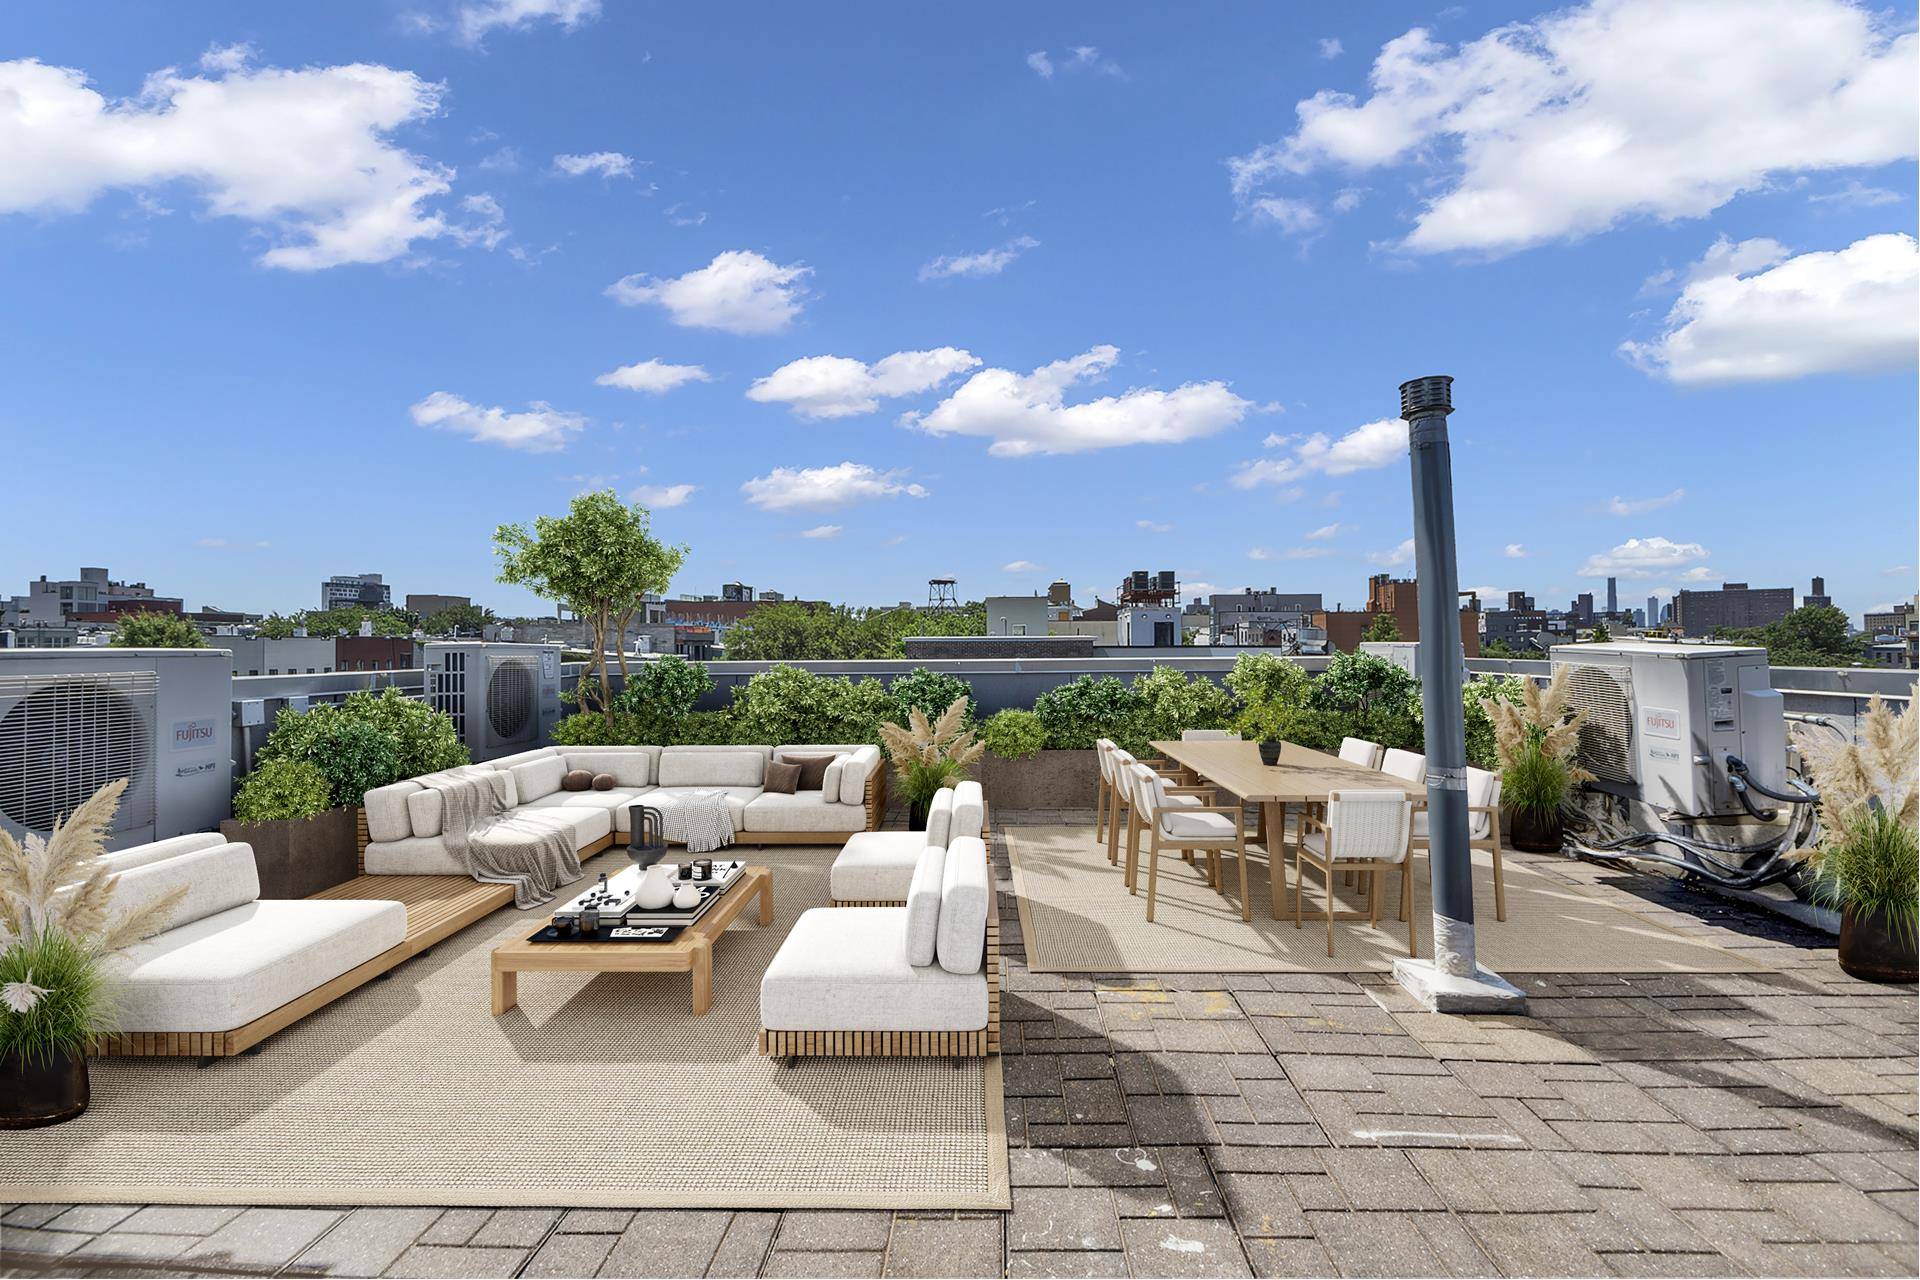 Experience the pinnacle of urban living with a private rooftop oasis in Bushwick, Brooklyn !